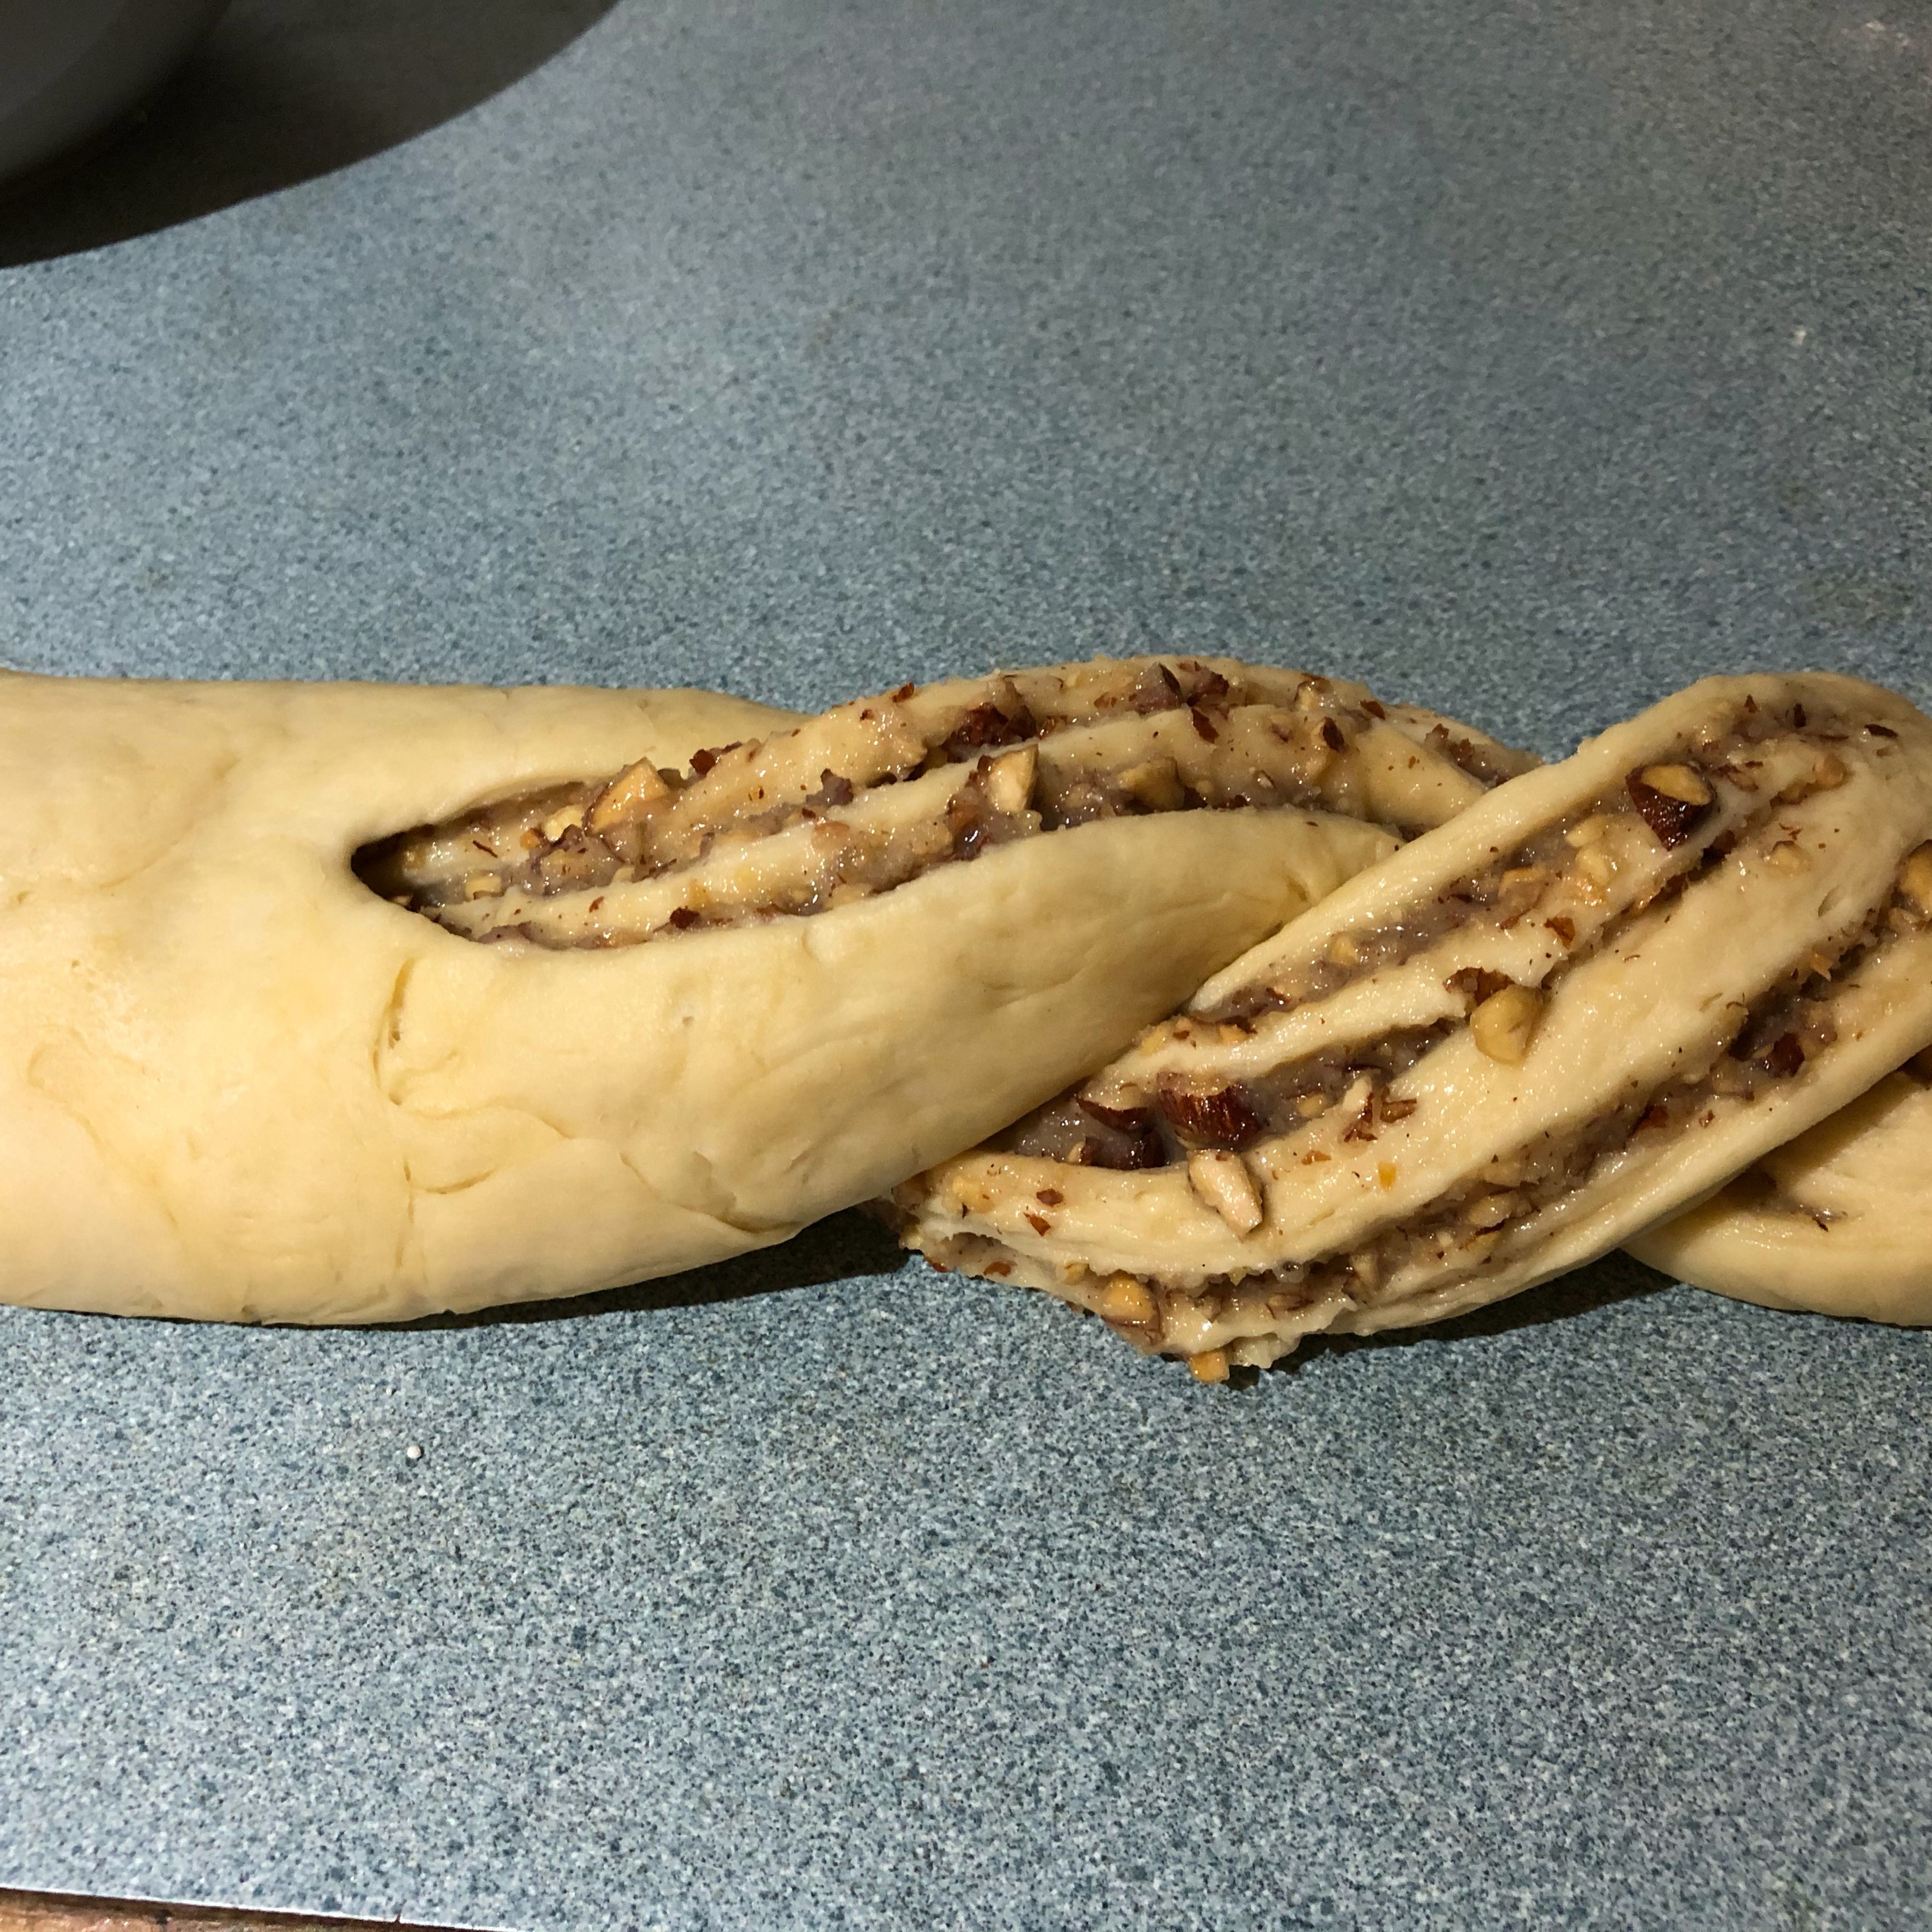 Roll up the dough from the long edge to form a log. Cut into halves from the middle to the end and wrap two halves around reach other.